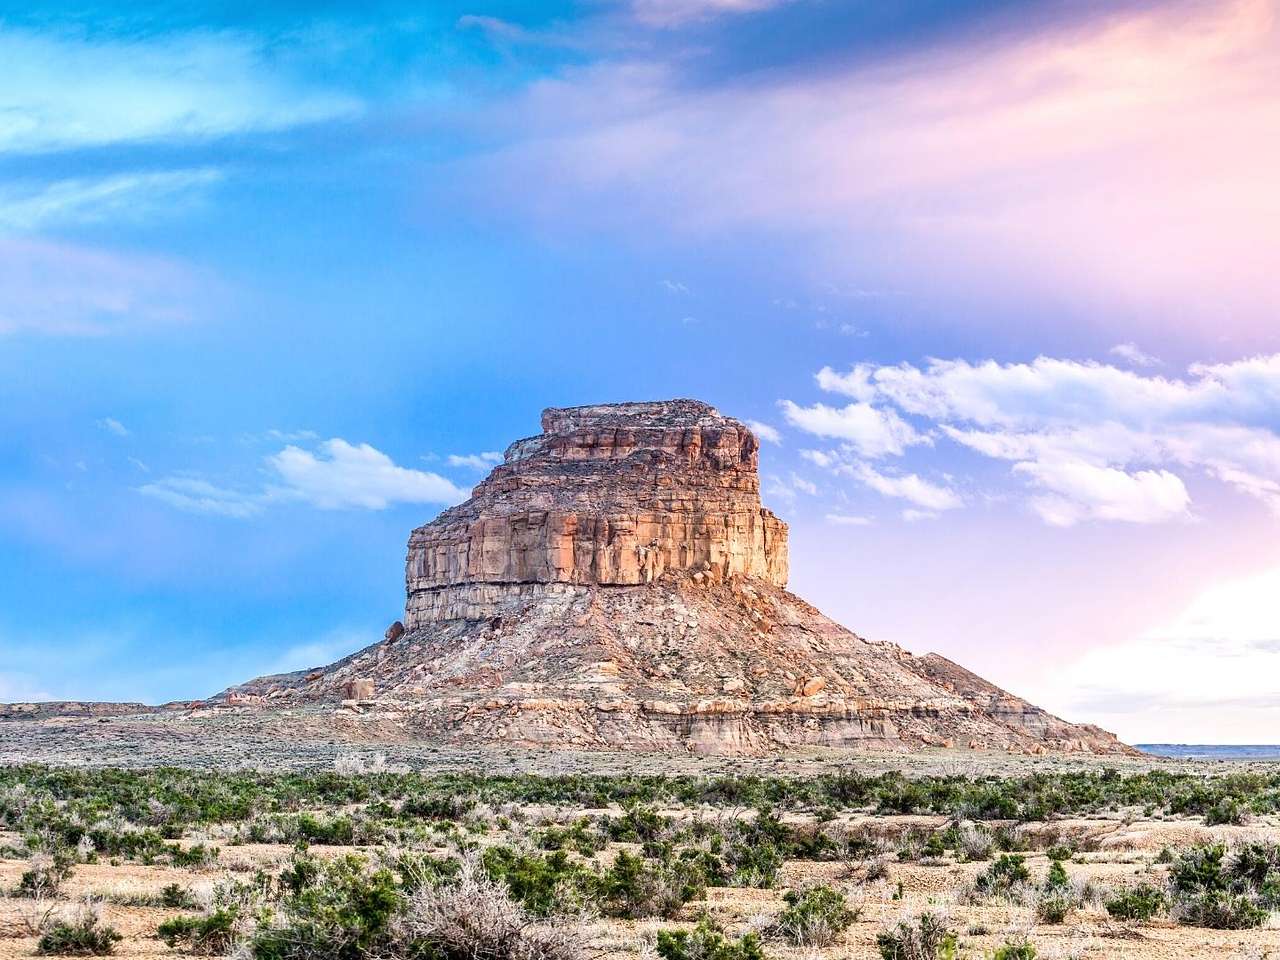 Visit New Mexico’s Top 3 Historic Sites